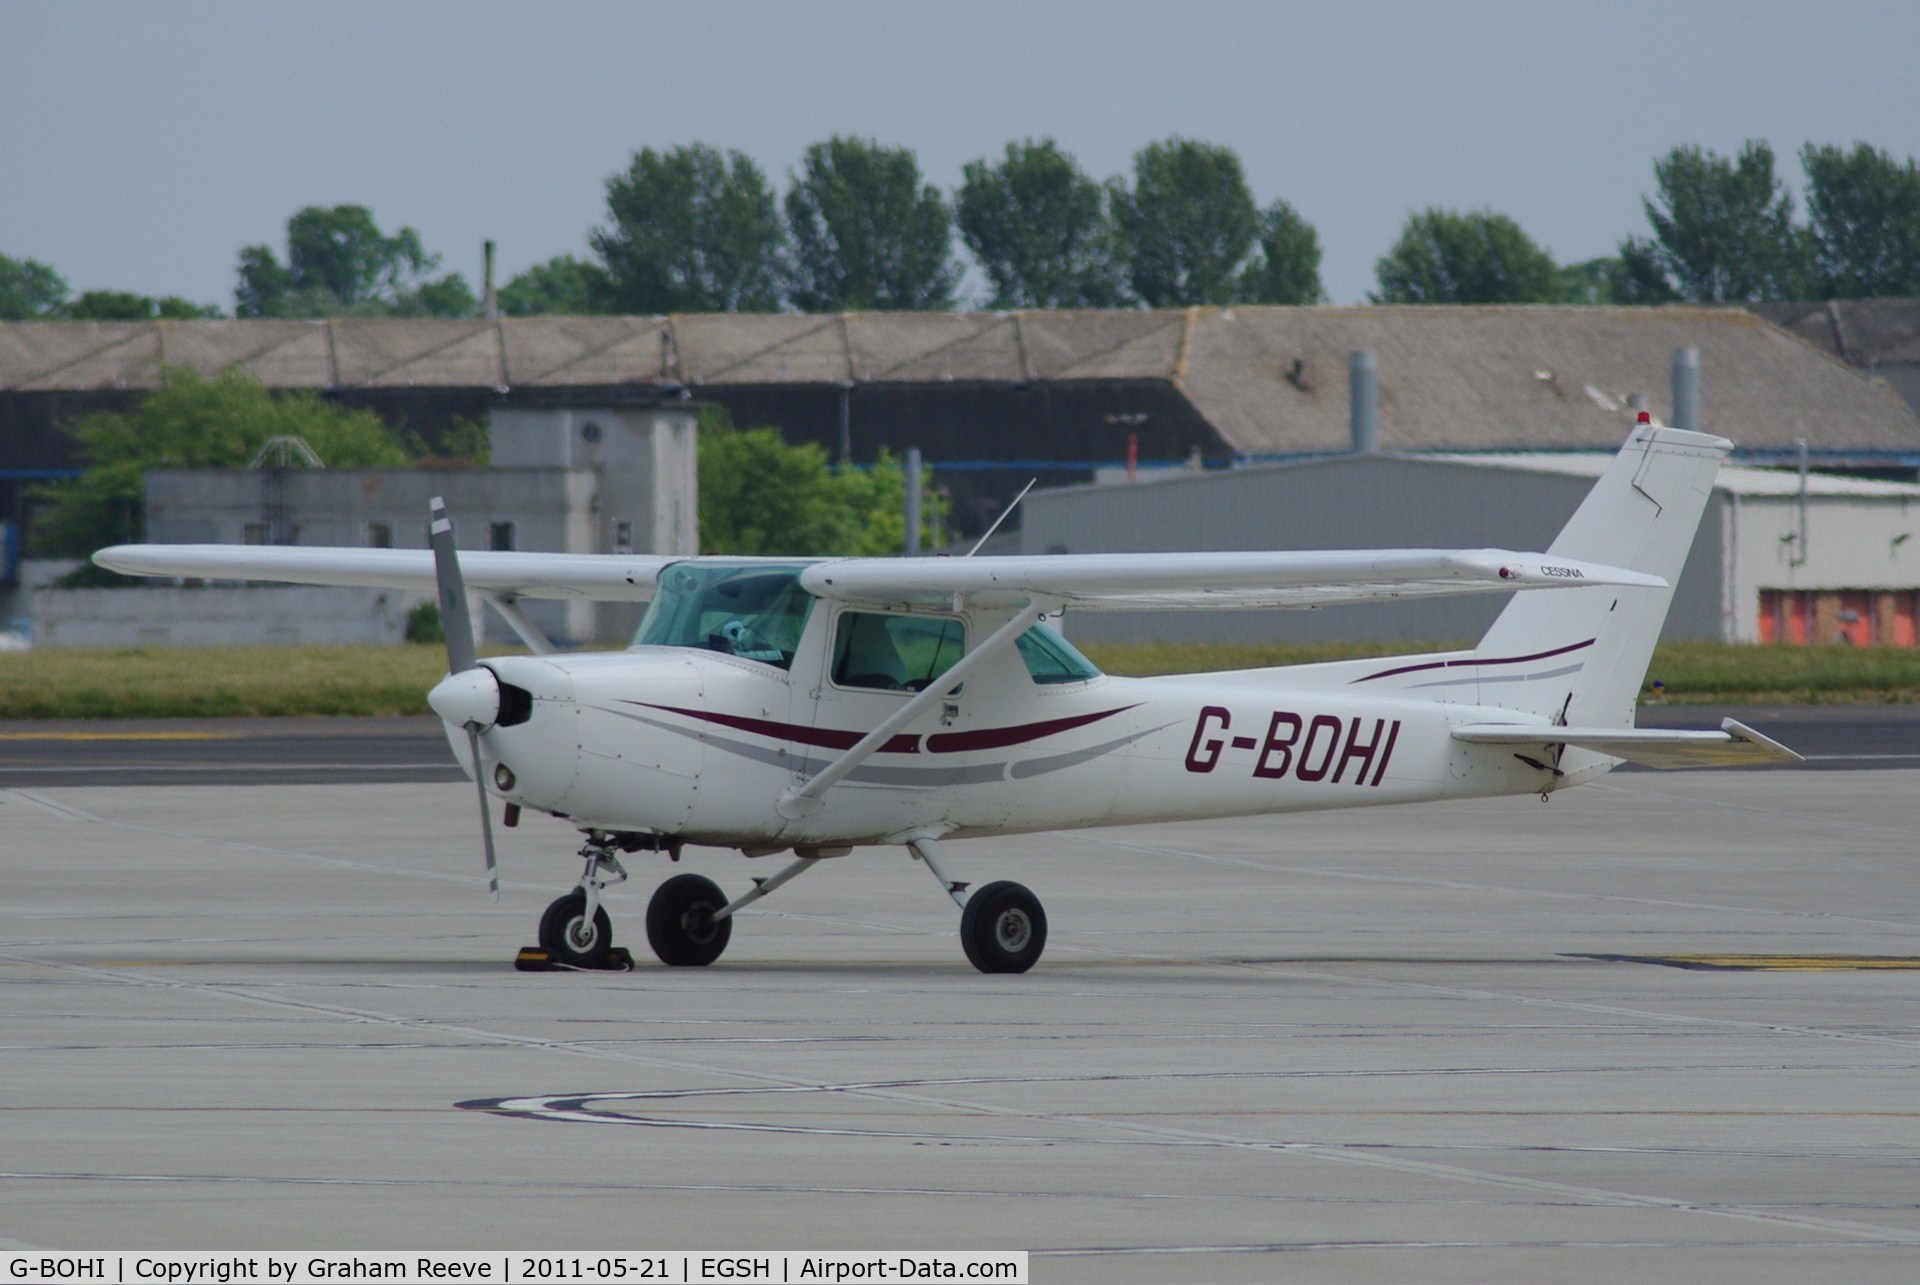 G-BOHI, 1978 Cessna 152 C/N 15281241, Parked in the sun.